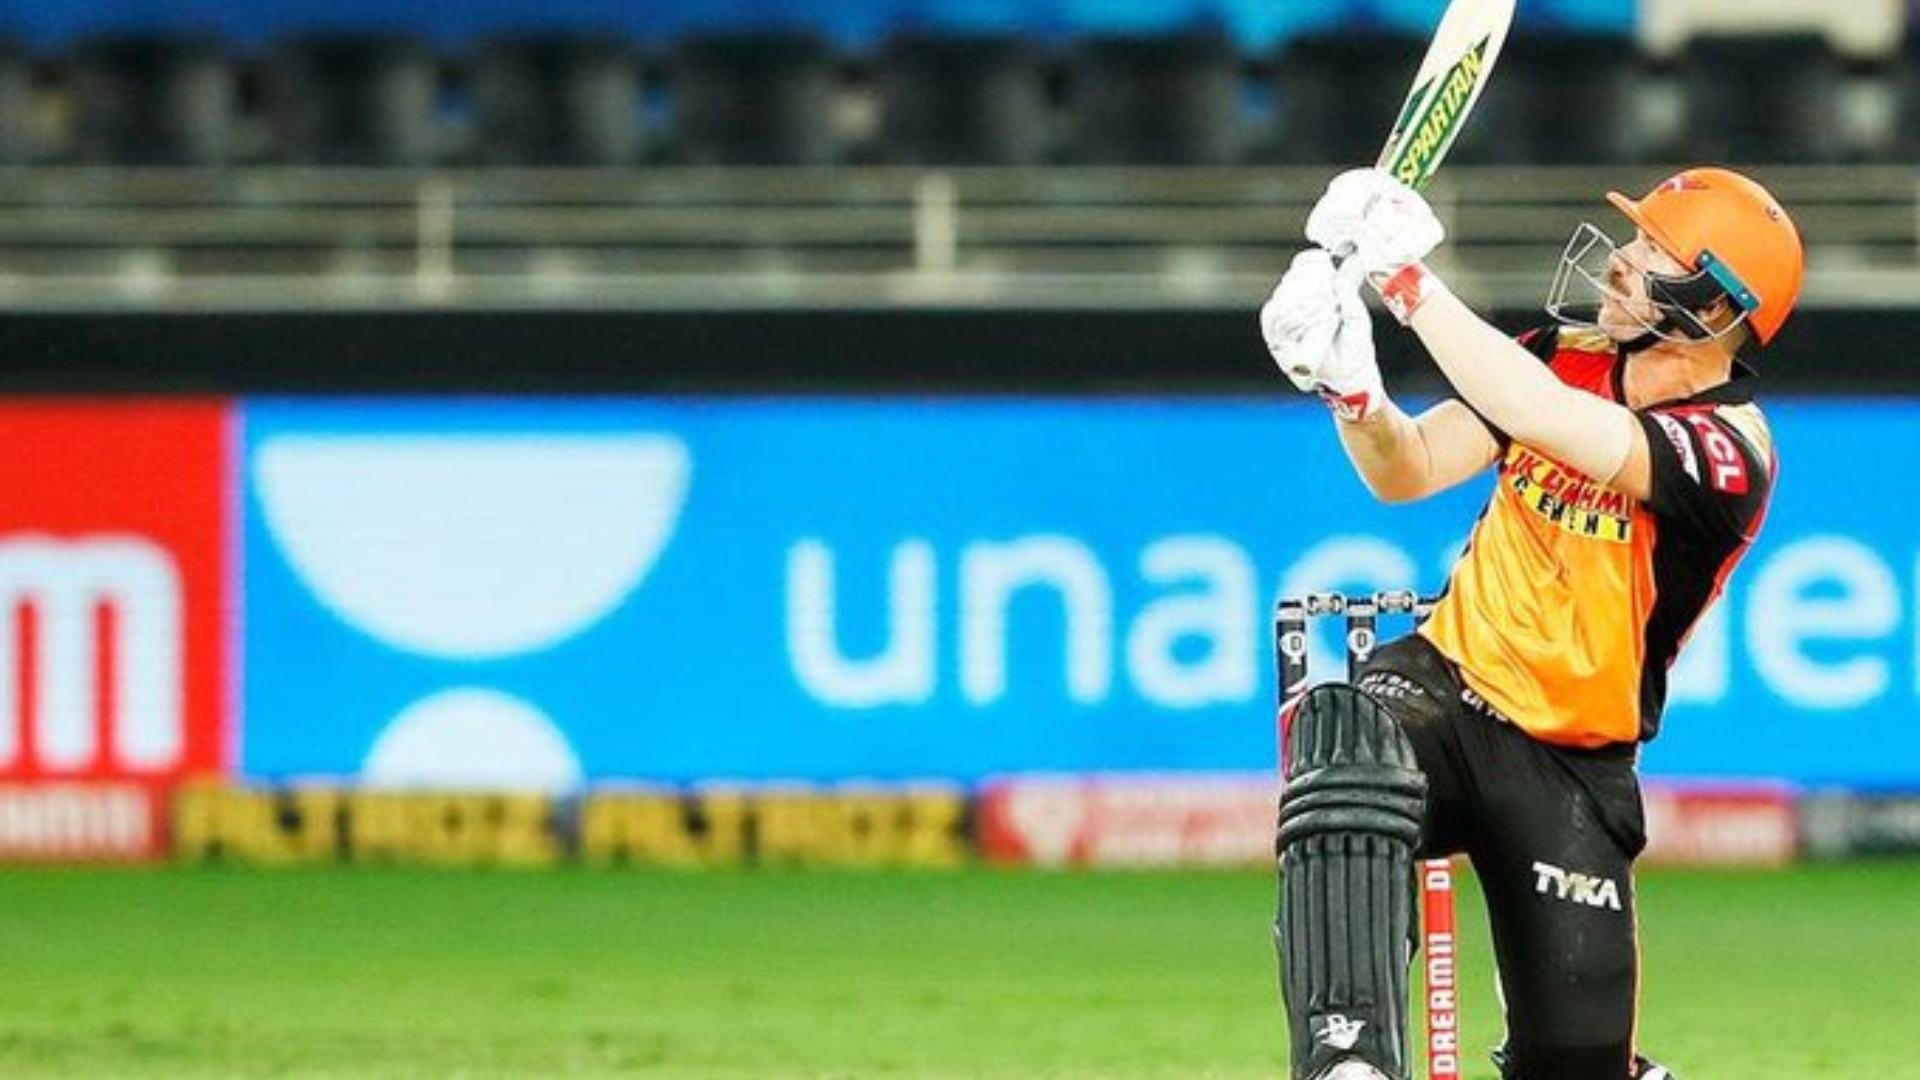 David Warner has hit 49 fifties and could be the first player to hit 50 fifties in the Indian Premier League.